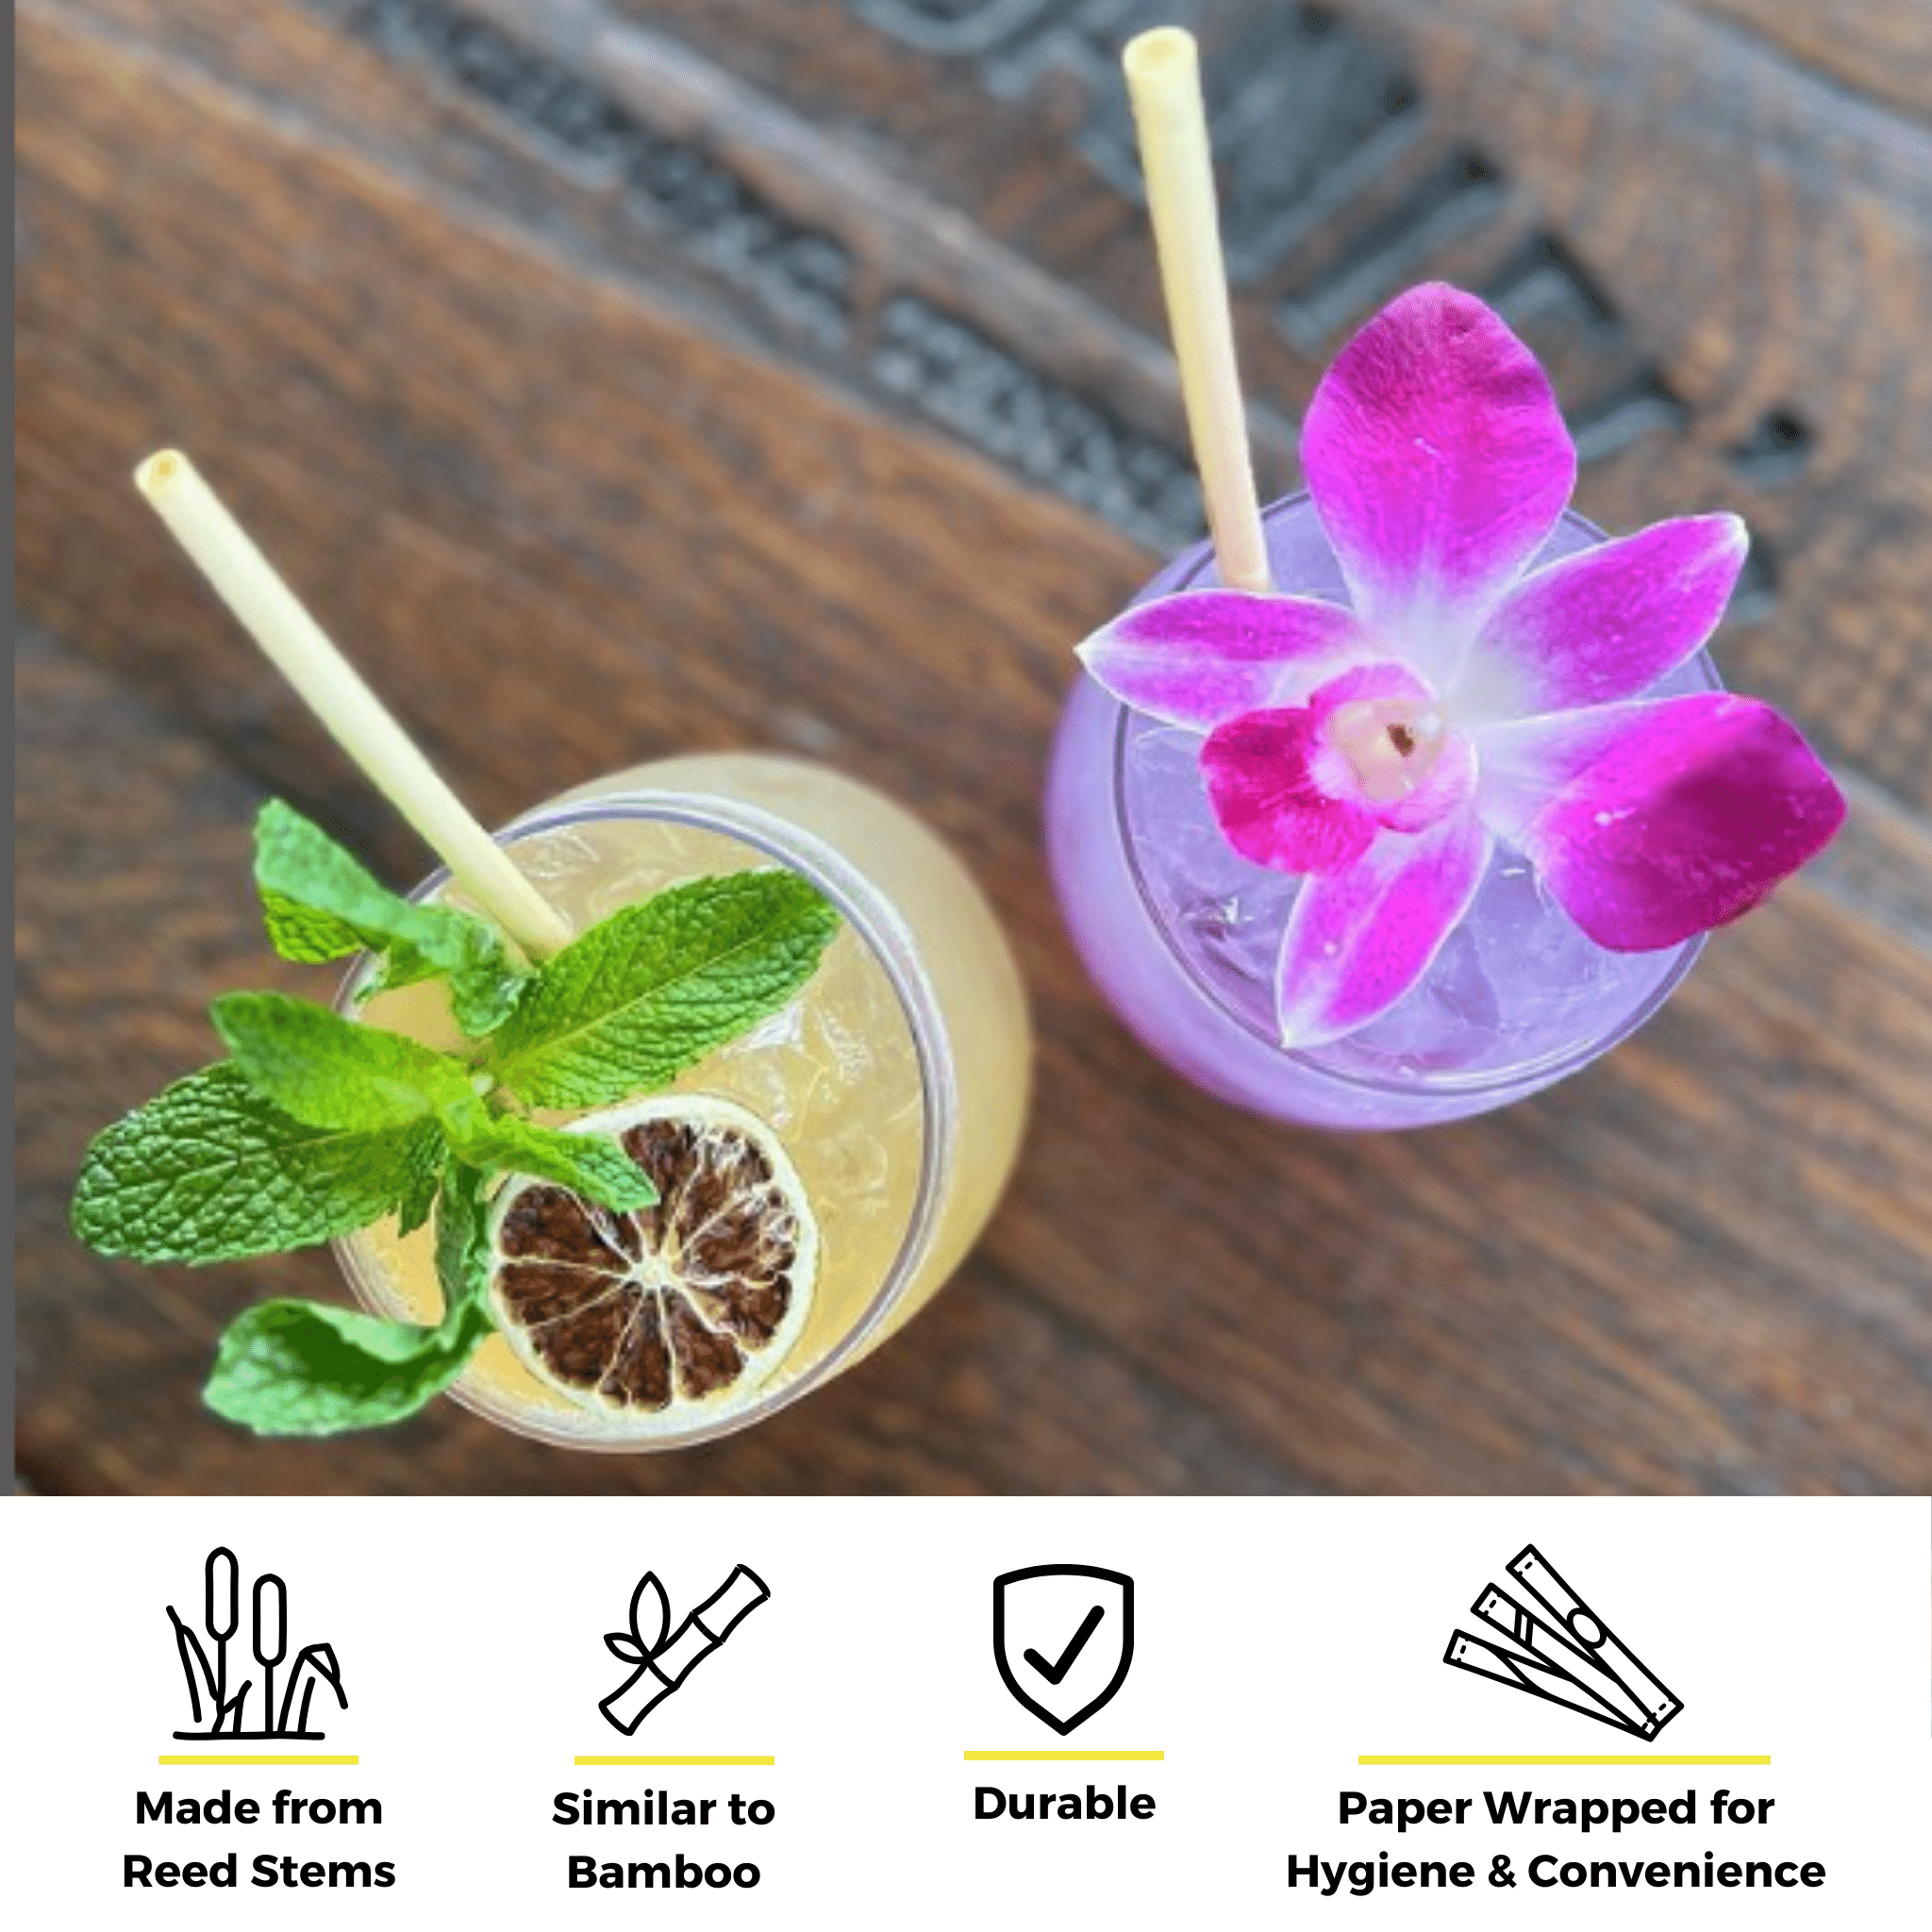 Two colorful cocktails sit on a wooden surface. One is garnished with mint leaves and a dried citrus slice, while the other has a purple orchid flower. Both glasses contain cocktail skinny reed straws made from reed stems. Icons at the bottom emphasize that these straws are made from reed stems, similar to bamboo, durable, and paper wrapped for hygiene and convenience..